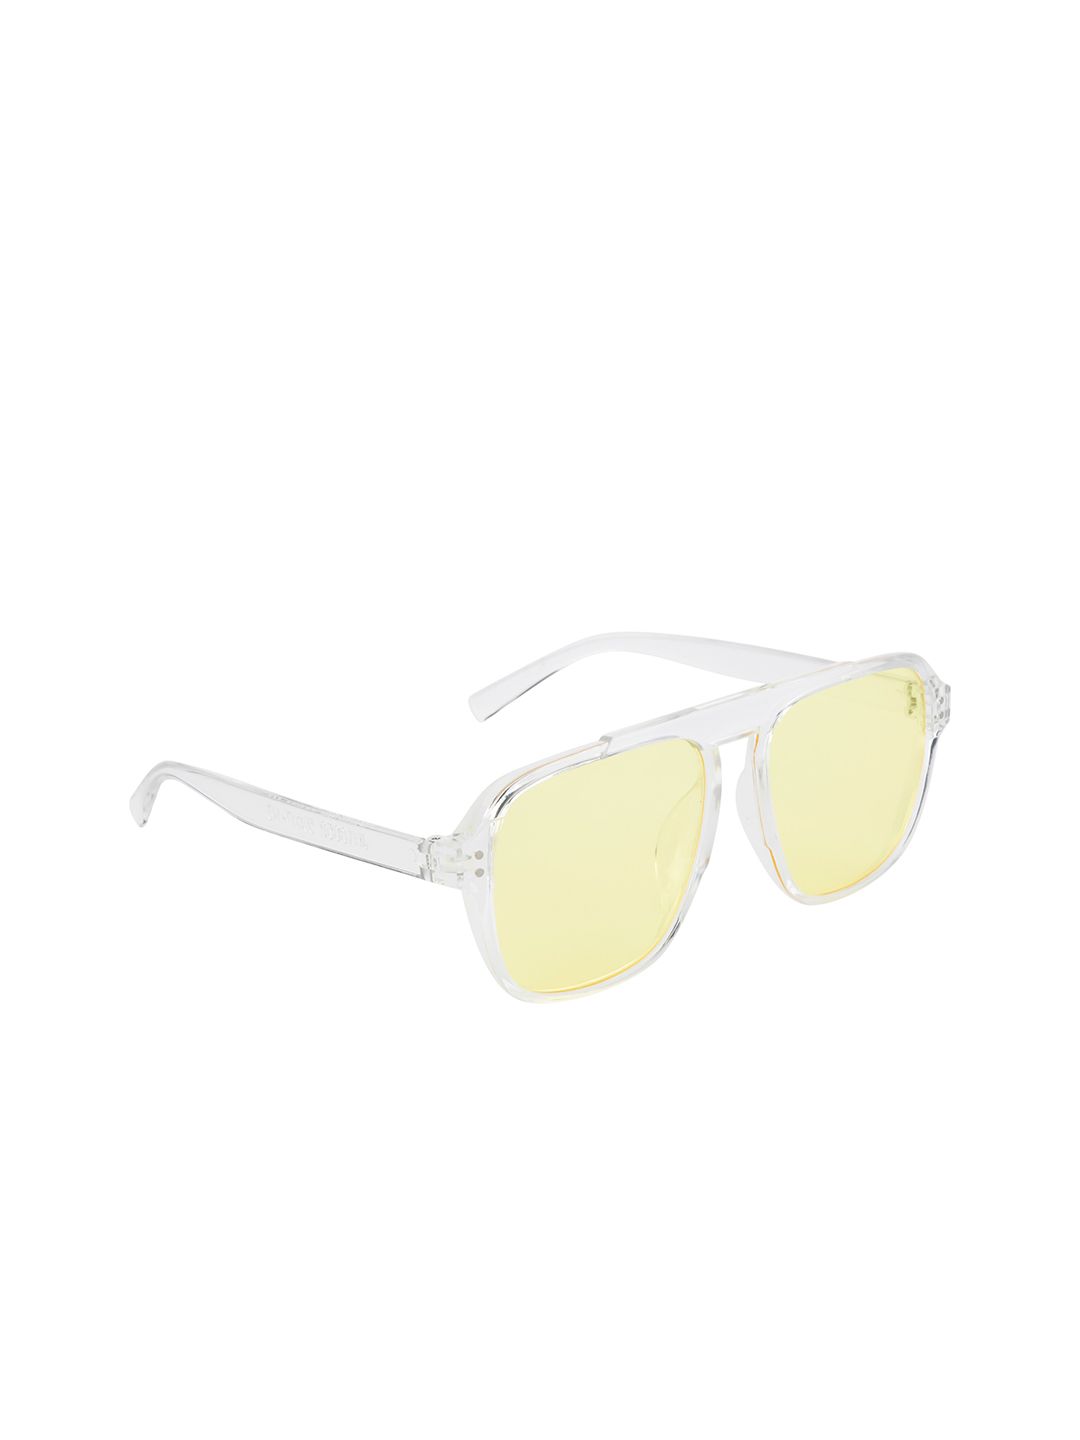 Ted Smith Unisex Yellow Lens Aviator Sunglasses with UV Protected Lens TS-XMEN_YELL Price in India